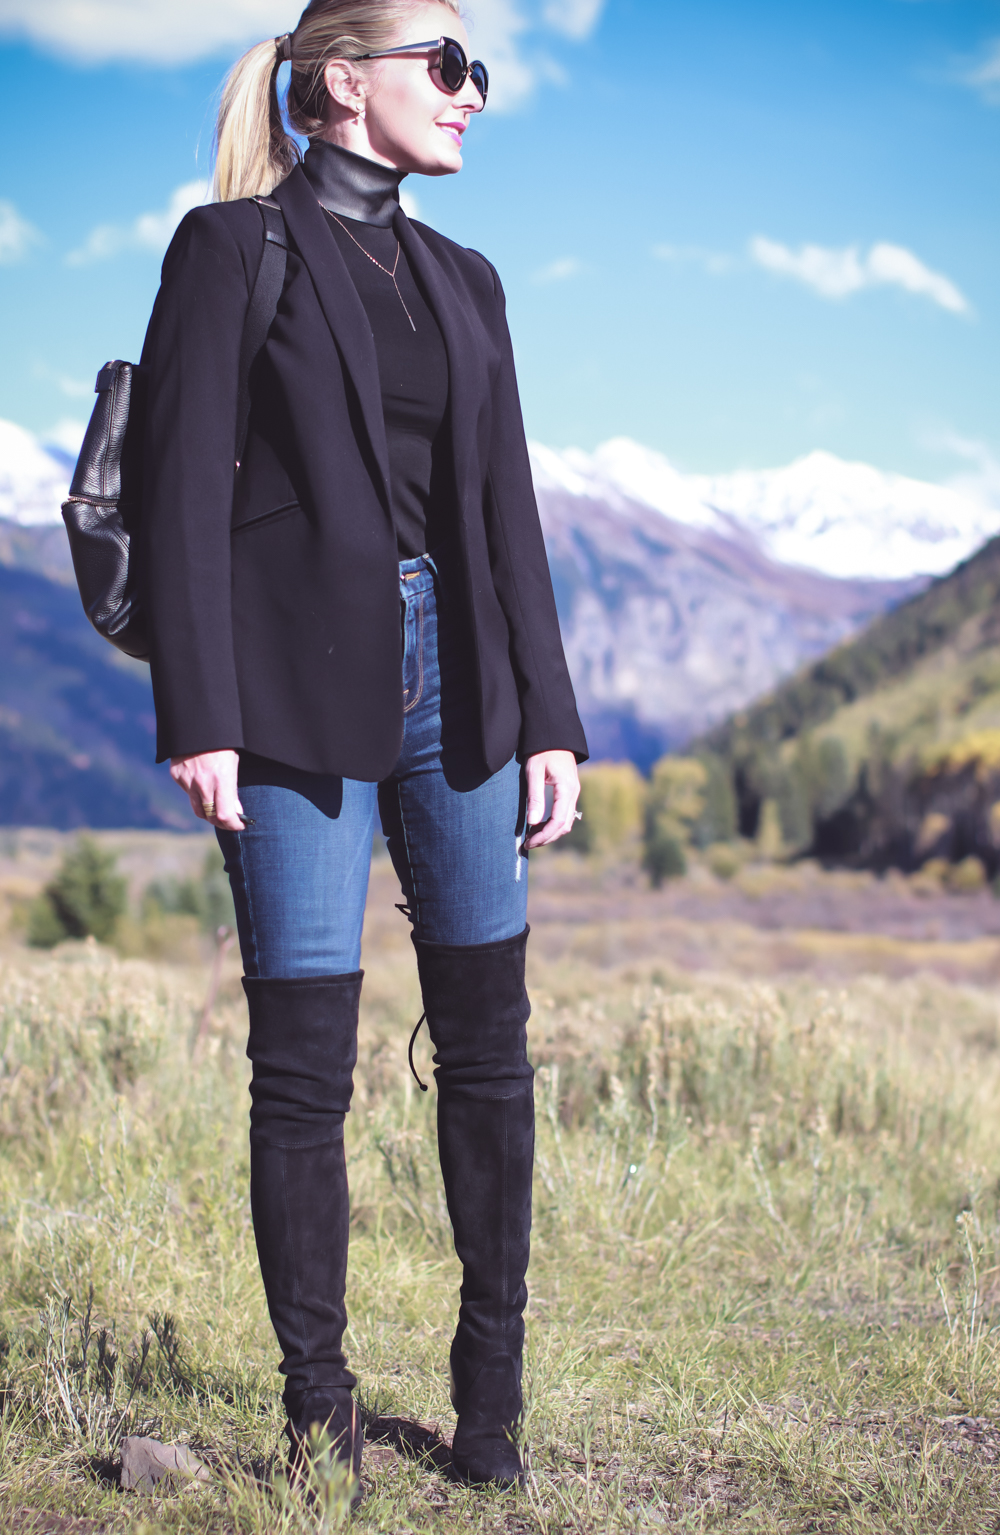 Tall Boots, over the knee boots, how to wear otk boots if you are tall or petite, featuring fashion blogger, Erin Busbee of Busbee Style in Telluride, Colorado, wearing Stuart Weitzman lowland boots , carrying Henri Bendel Jetsetter convertible backpack, with vince camuto blazer and barney black turtleneck